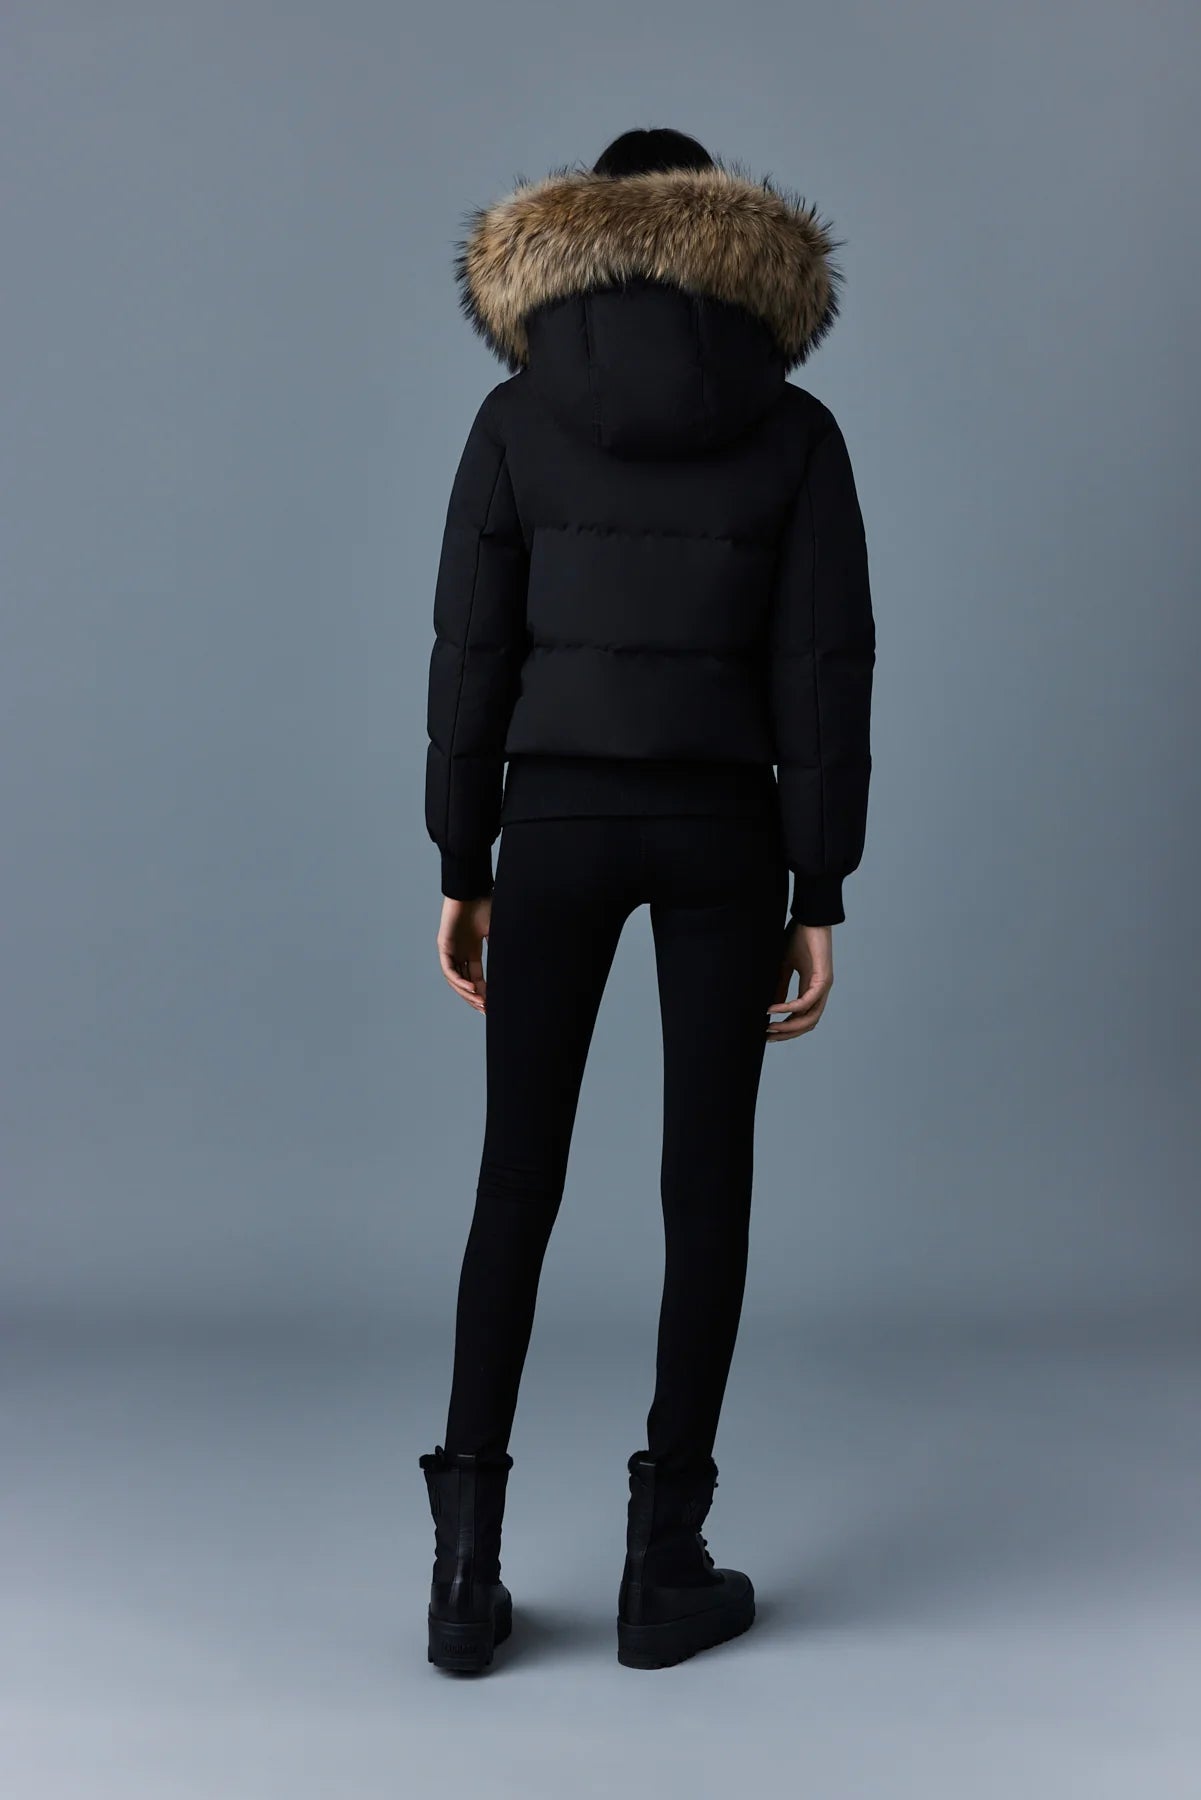 NEFI-F down jacket with removable fur trimmed hood  DOWN TO -20ºC